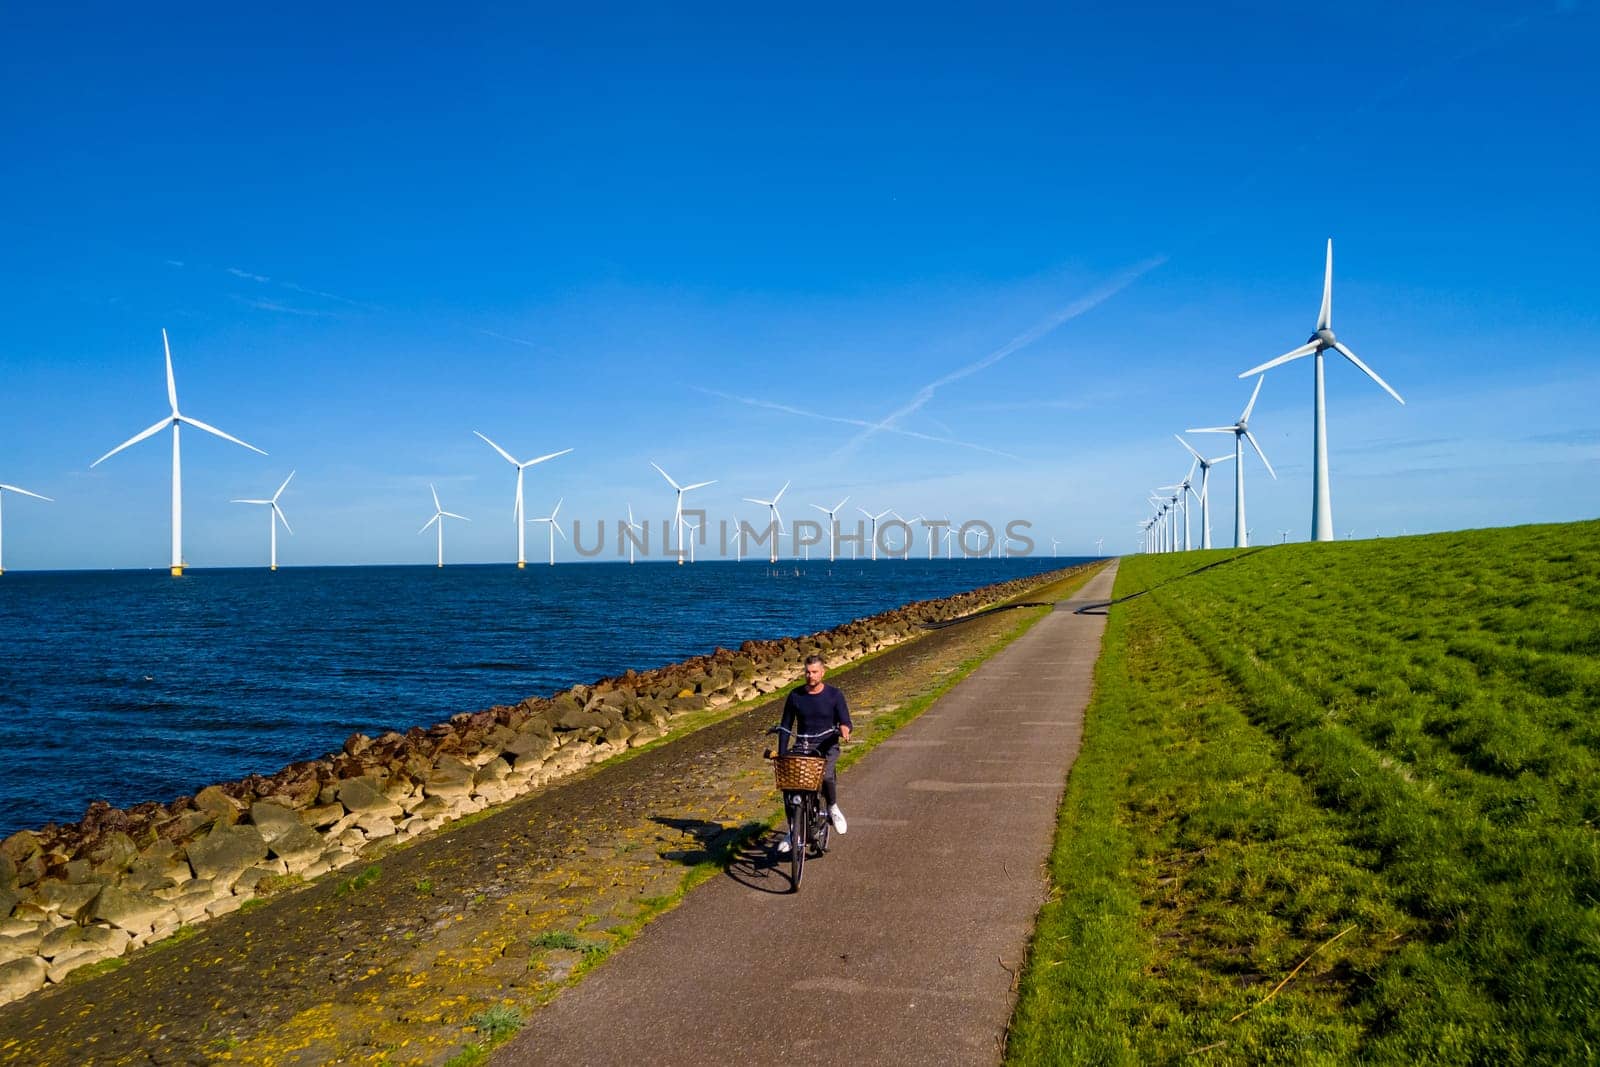 A man energetically cycling down a path lined with wind turbines in the Netherlands Flevoland during the vibrant spring season. men on electric bike with windmill turbines on the background